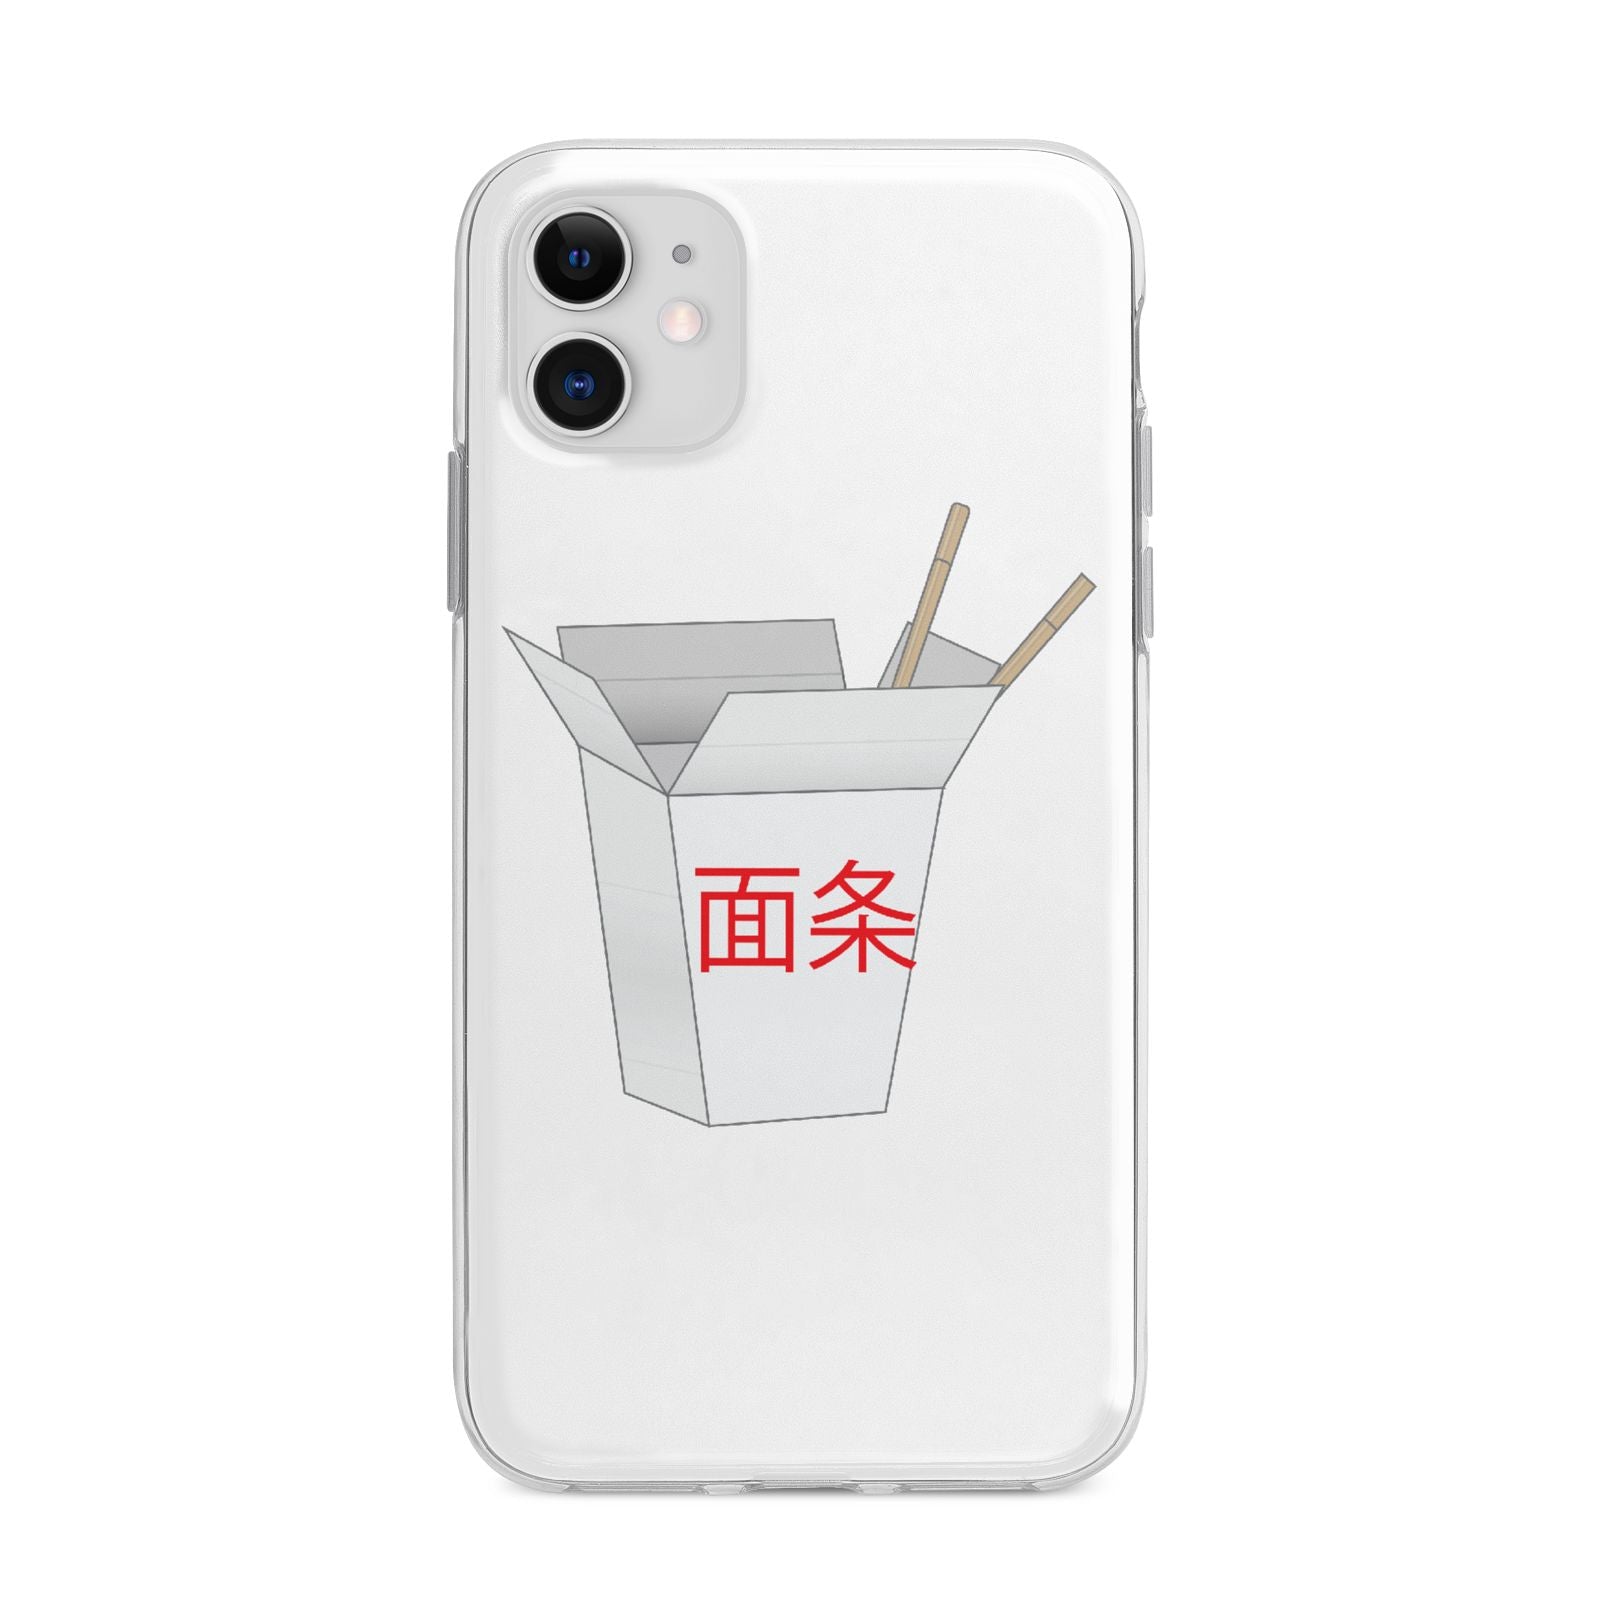 Chinese Takeaway Box Apple iPhone 11 in White with Bumper Case